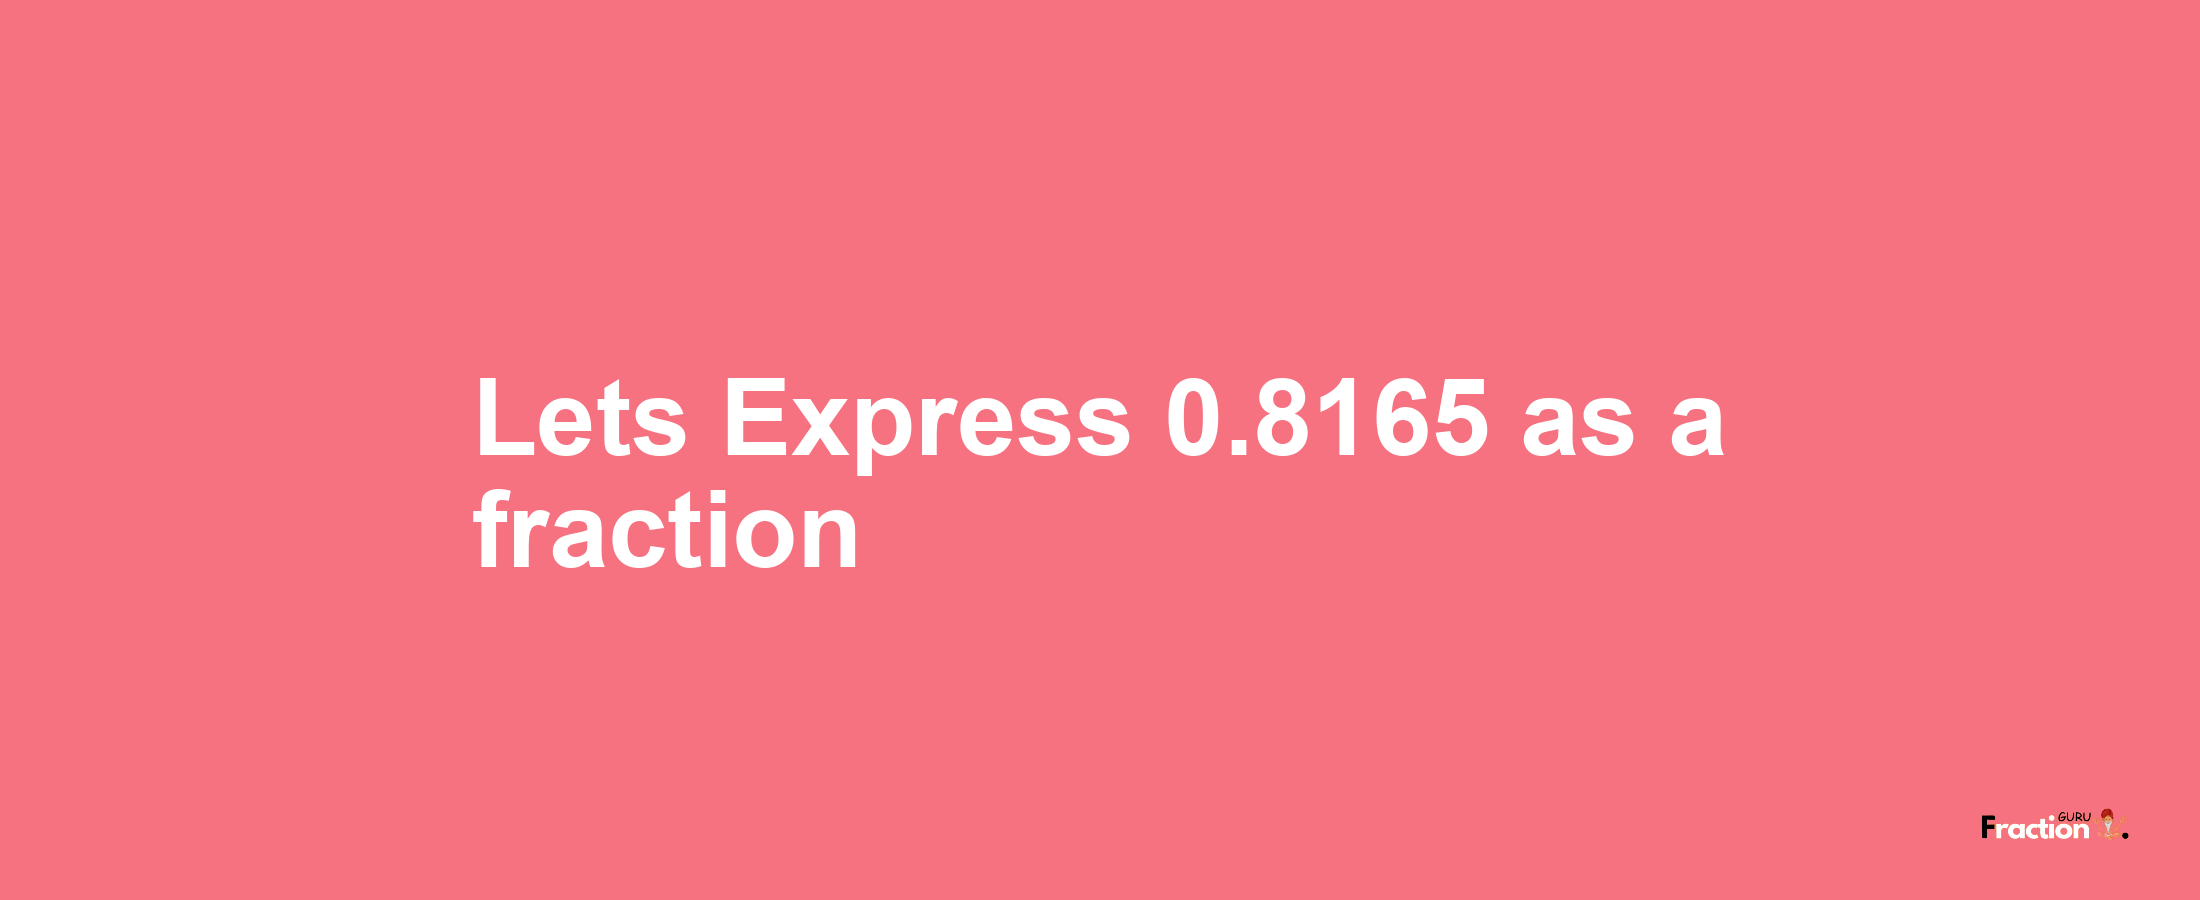 Lets Express 0.8165 as afraction